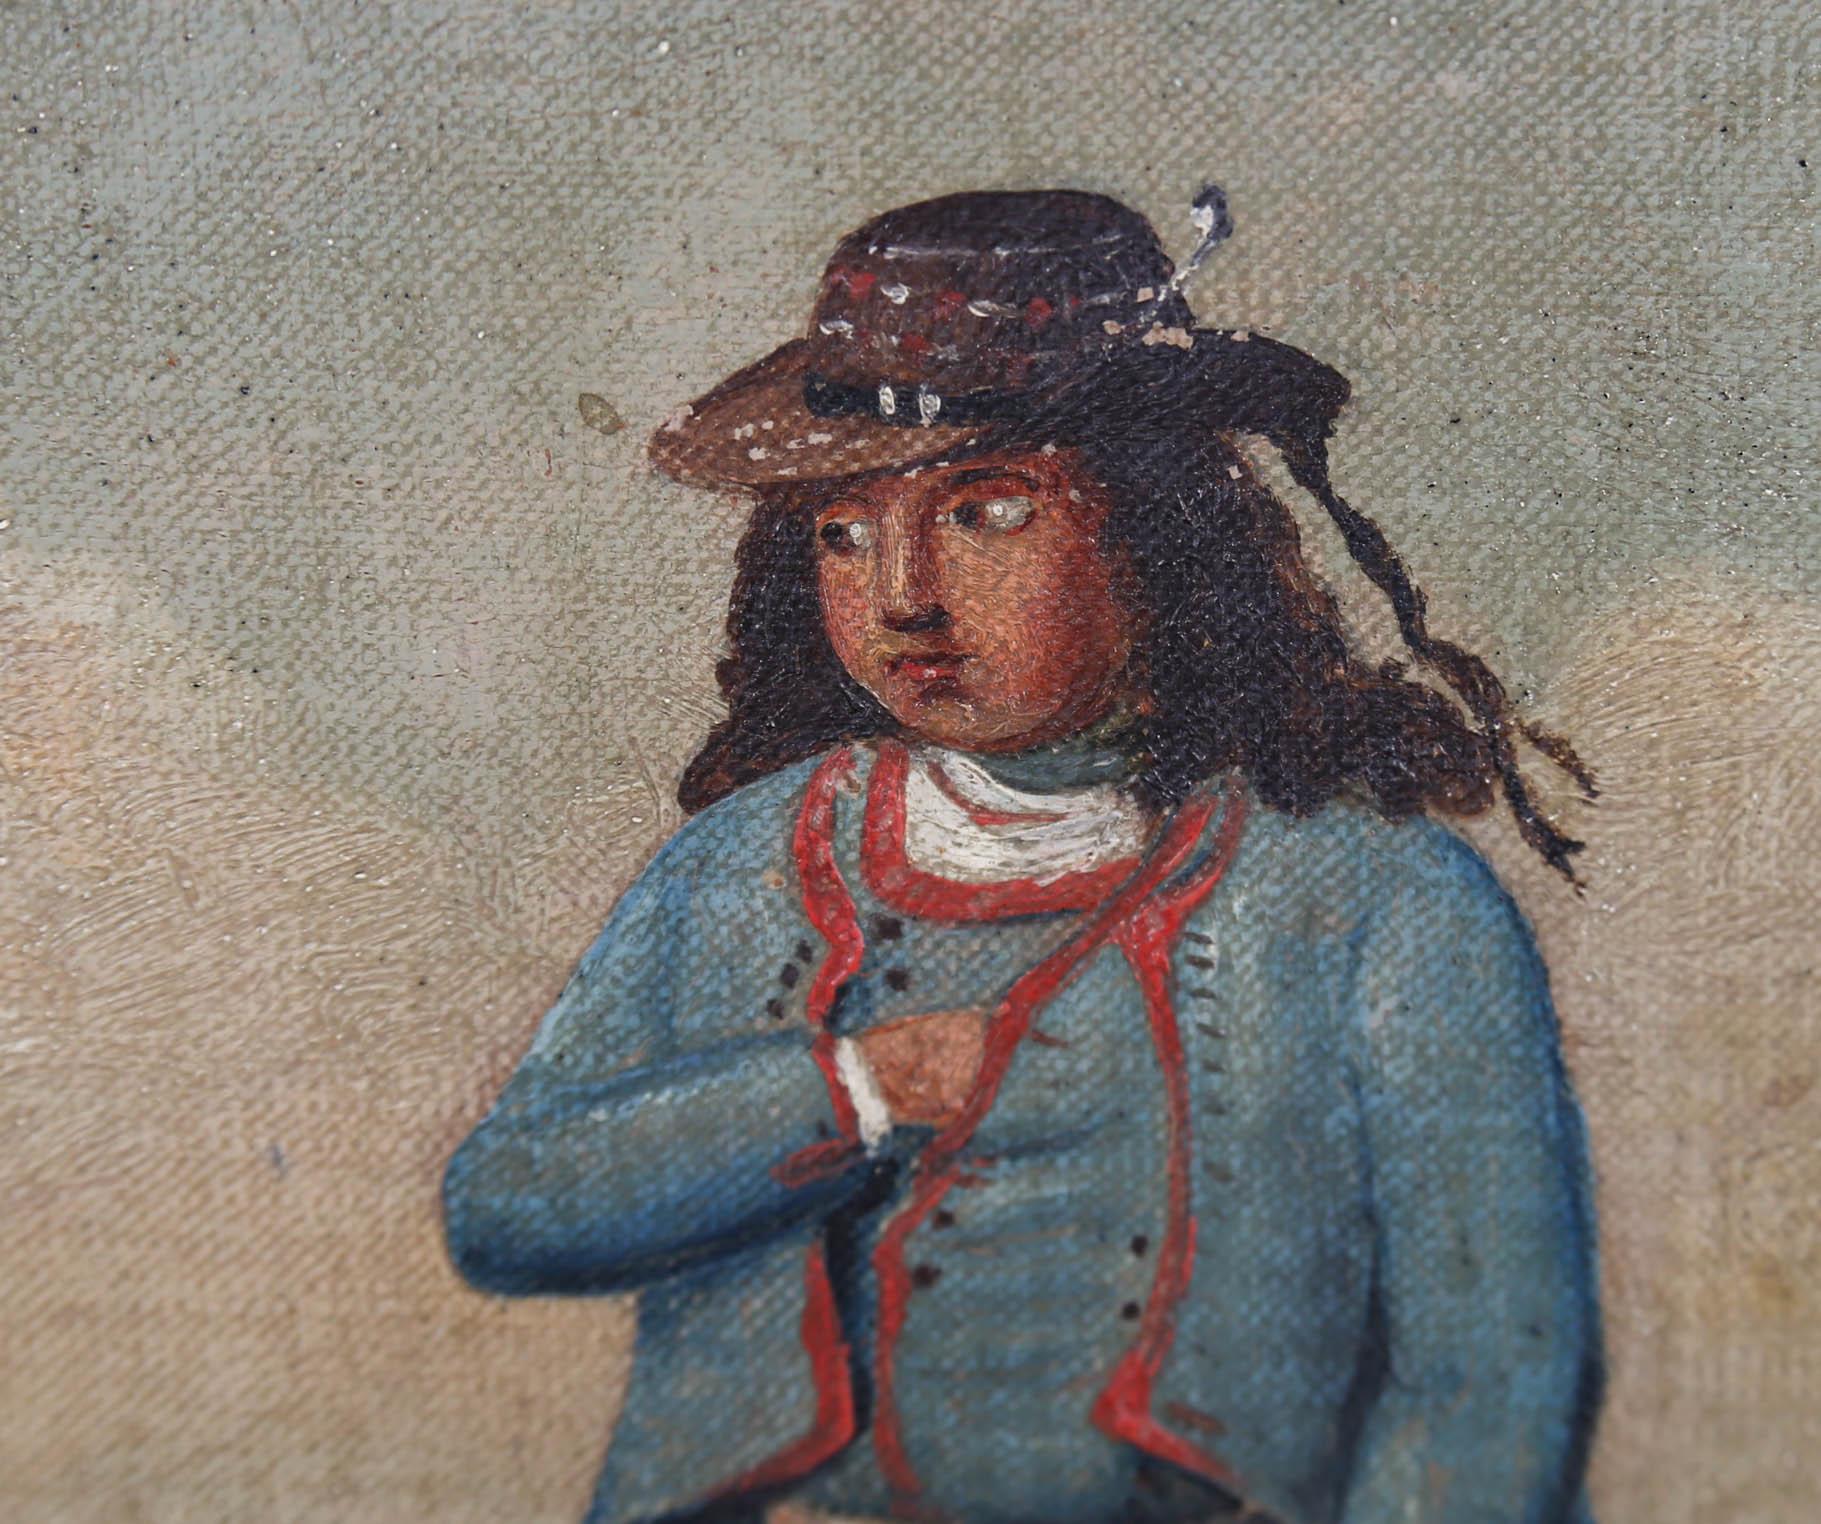 This delightful portrait depicts a peasant man dressed in blue bloomers and a lined jacket. The artist captures the man's features in a charmingly naïve folk style. He is presented before a mountain lake with a sailboat in the distance. Unsigned.